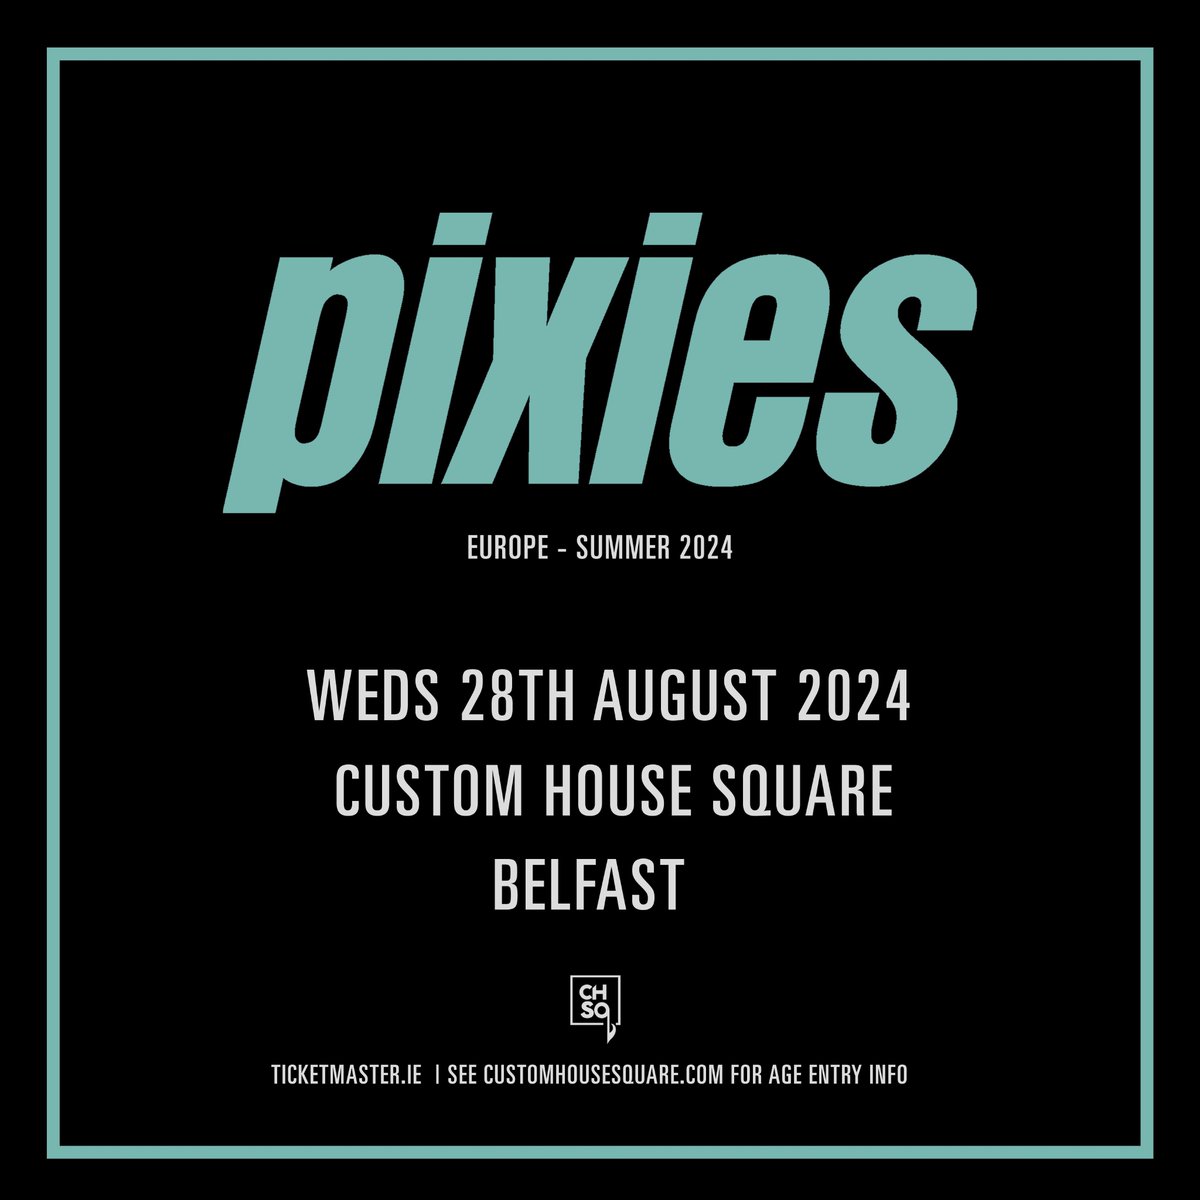 ★𝗝𝗨𝗦𝗧 𝗔𝗡𝗡𝗢𝗨𝗡𝗖𝗘𝗗★ @PIXIES plus guests 28 Aug 2024 @CHSqBelfast 𝗦𝗜𝗚𝗡 𝗨𝗣 for pre-sale ⇢ bit.ly/Pixies-SignUp 🔃 RT for a chance to WIN tix 🔃 Pre-Sale: Wed 9am General-Sale: Fri 9am